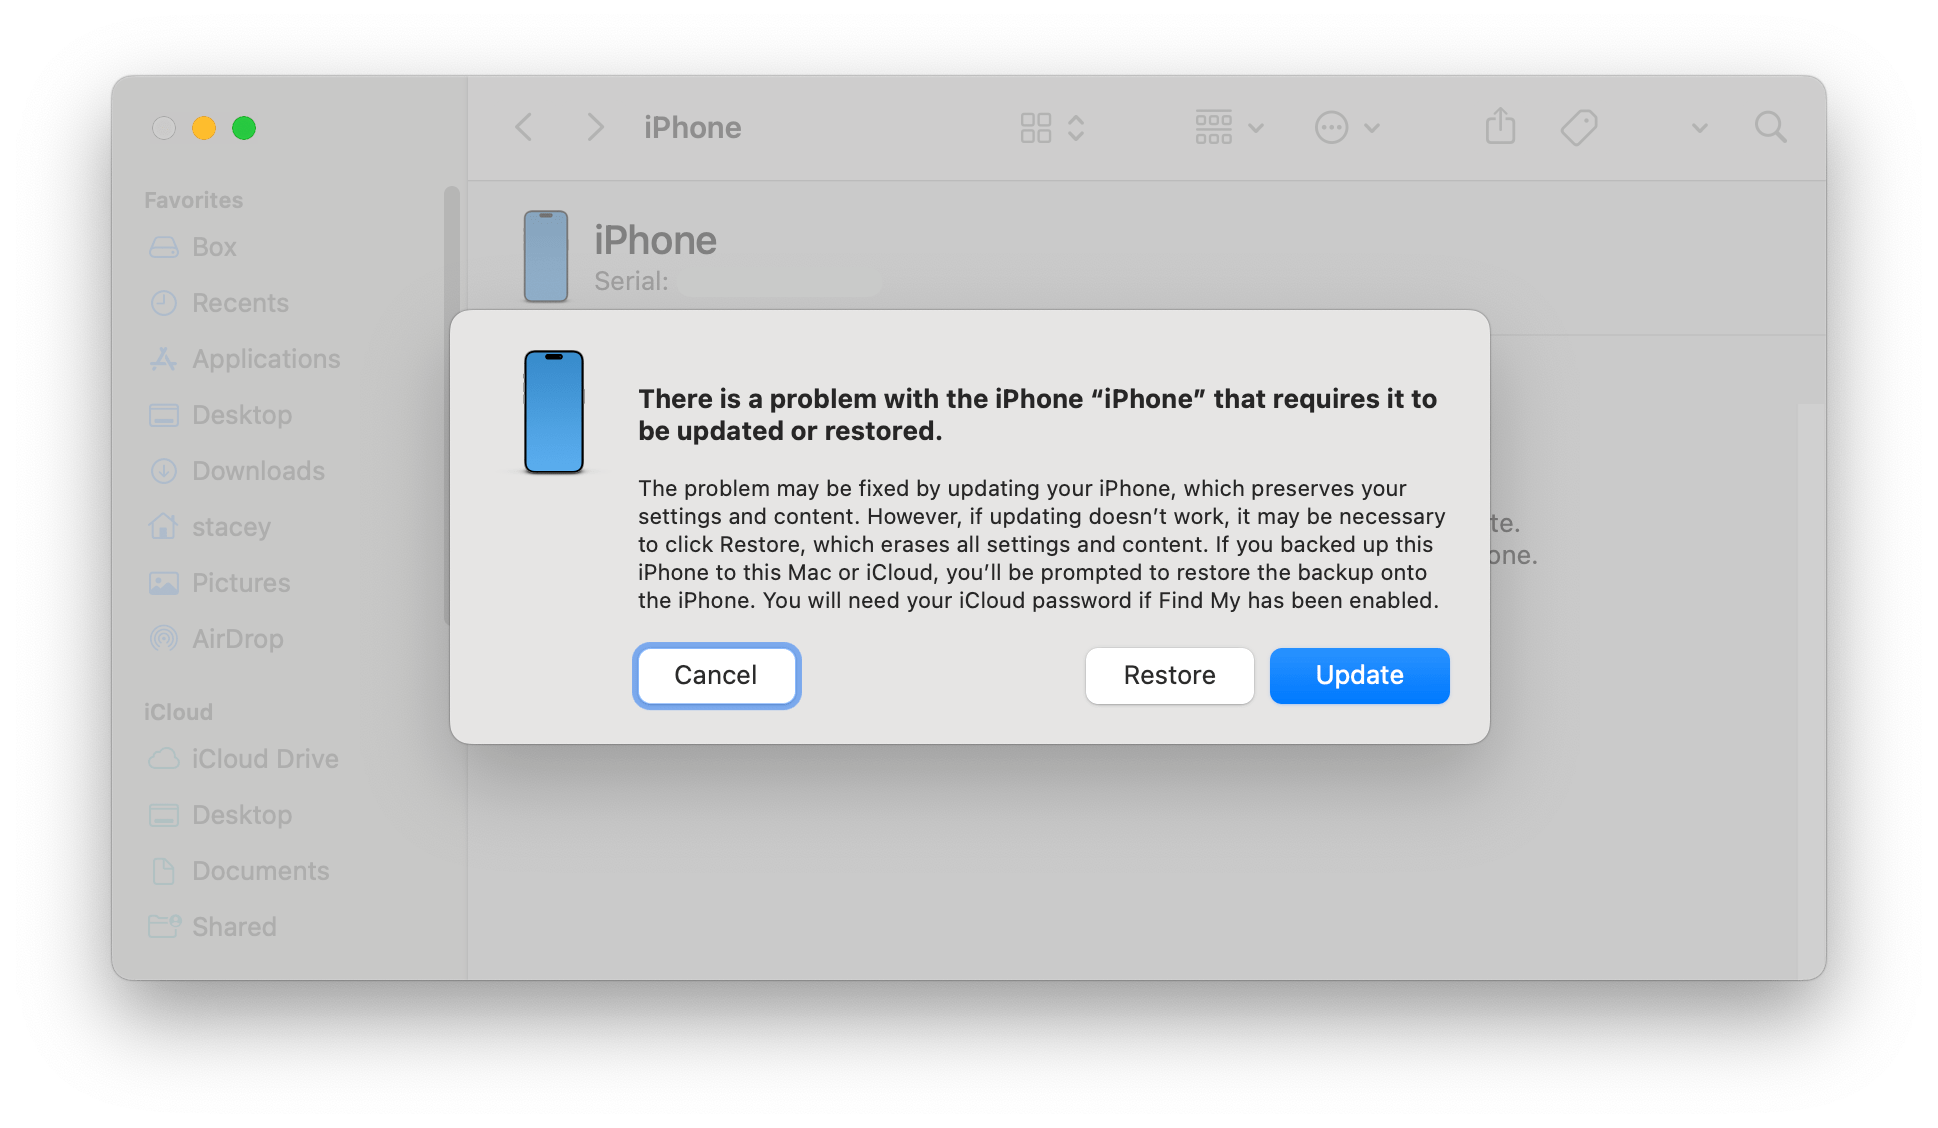 iPhone in recovery mode in Finder popup asking update or restore